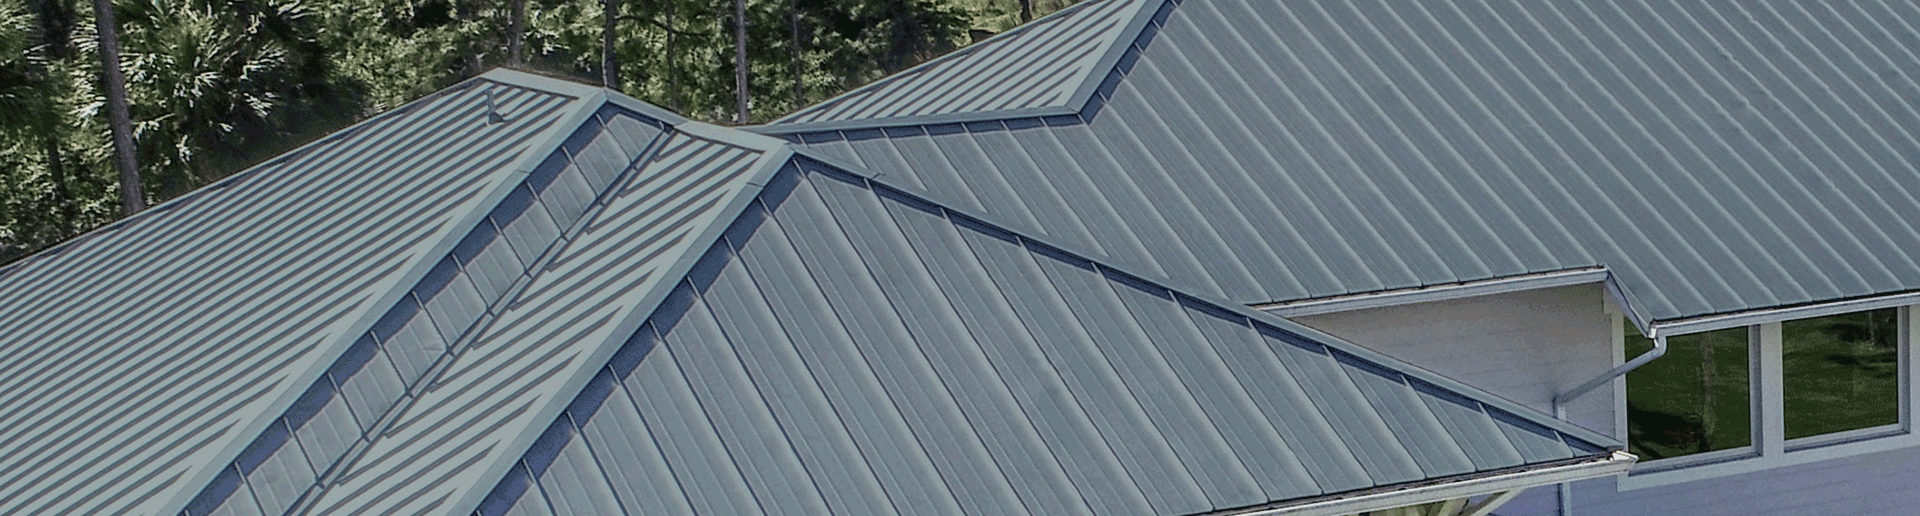 American Metal Roofing Supply Metal Roof Panels & Supplies in Florida Quality metal roofing